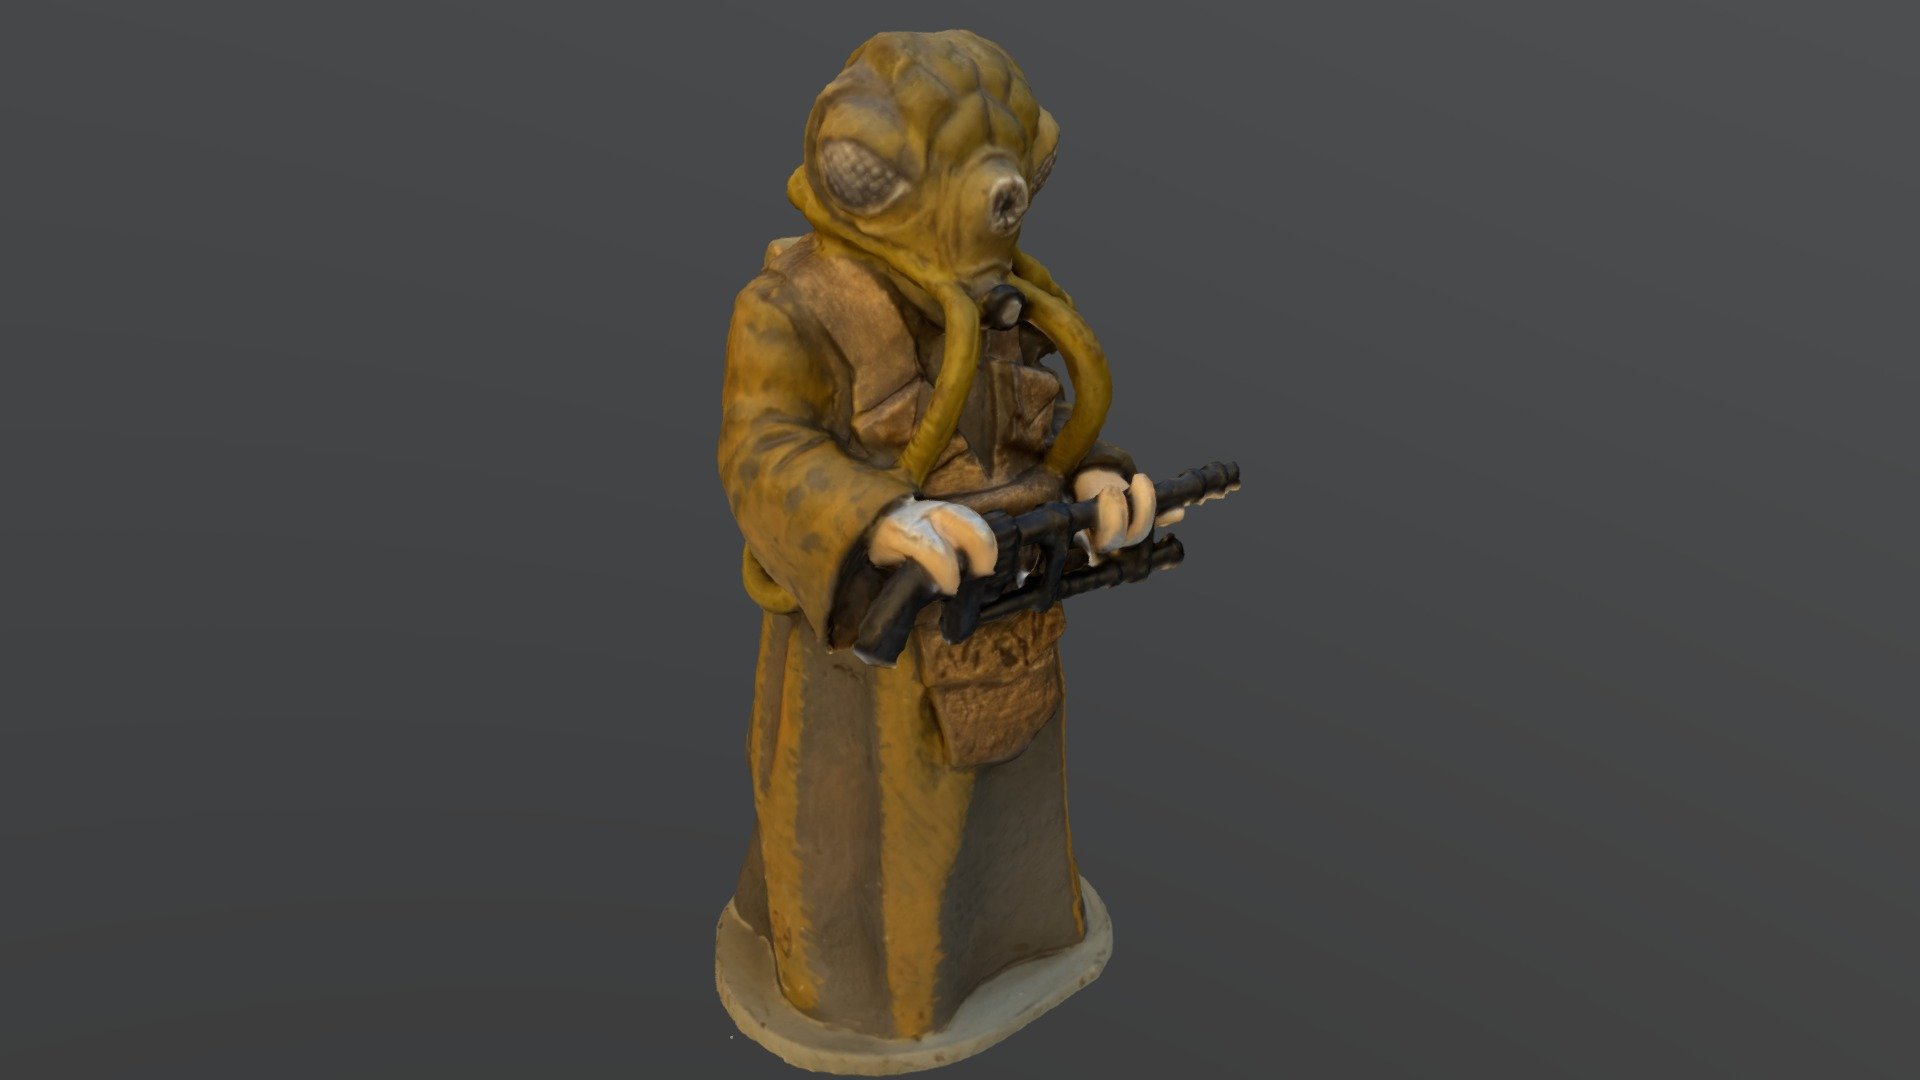 A miniature lead statue of Zuckuss, a character from the Star Wars franchise, captured with RealityScan photogrammetry software 3d model